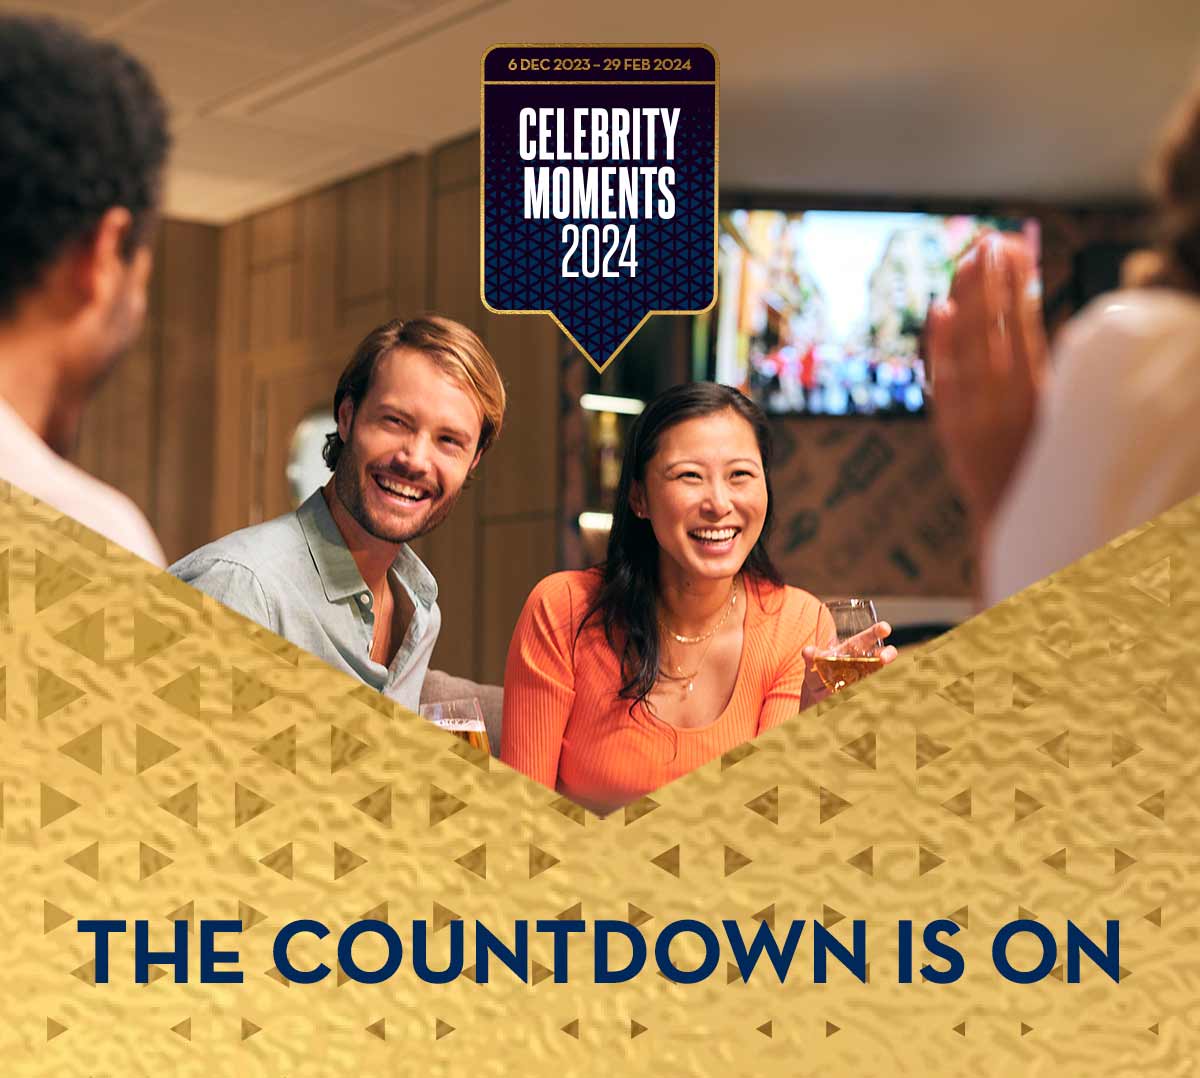 Celebrity Moments 2024 | The countdown is on